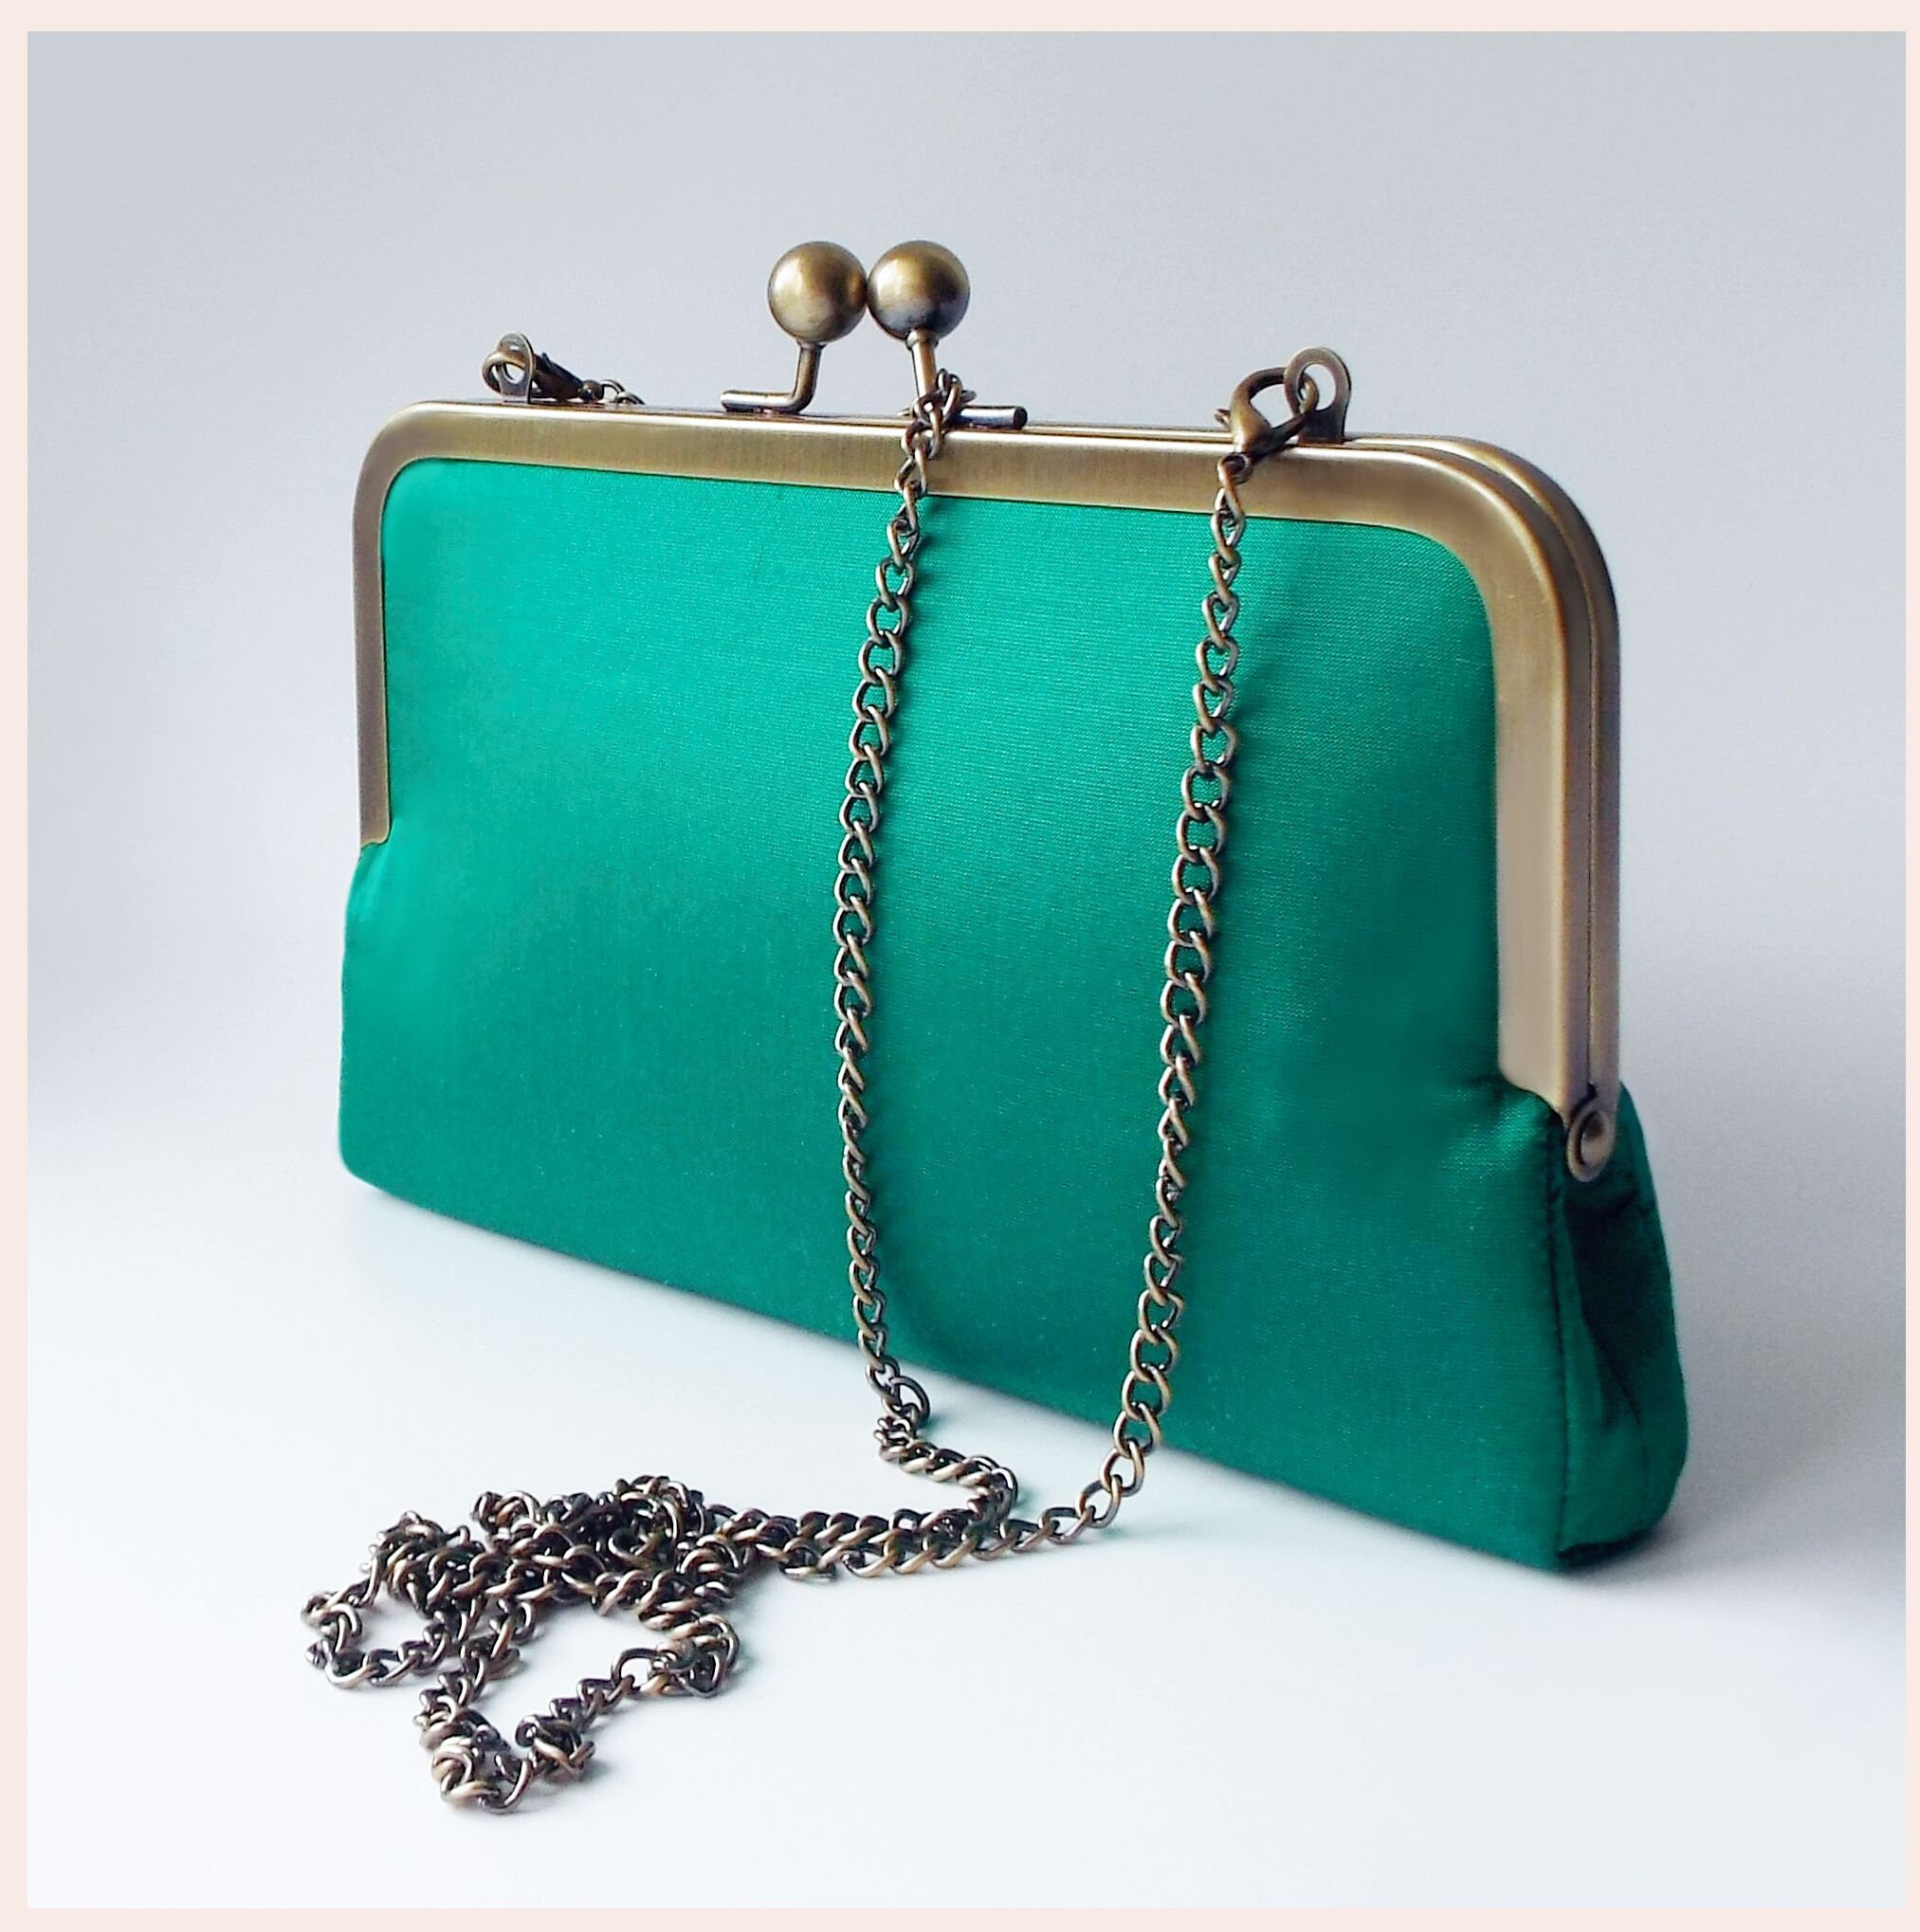 Finley “Cocktail Party” Clutch in Emerald Green Leather - Jeffrey Levinson